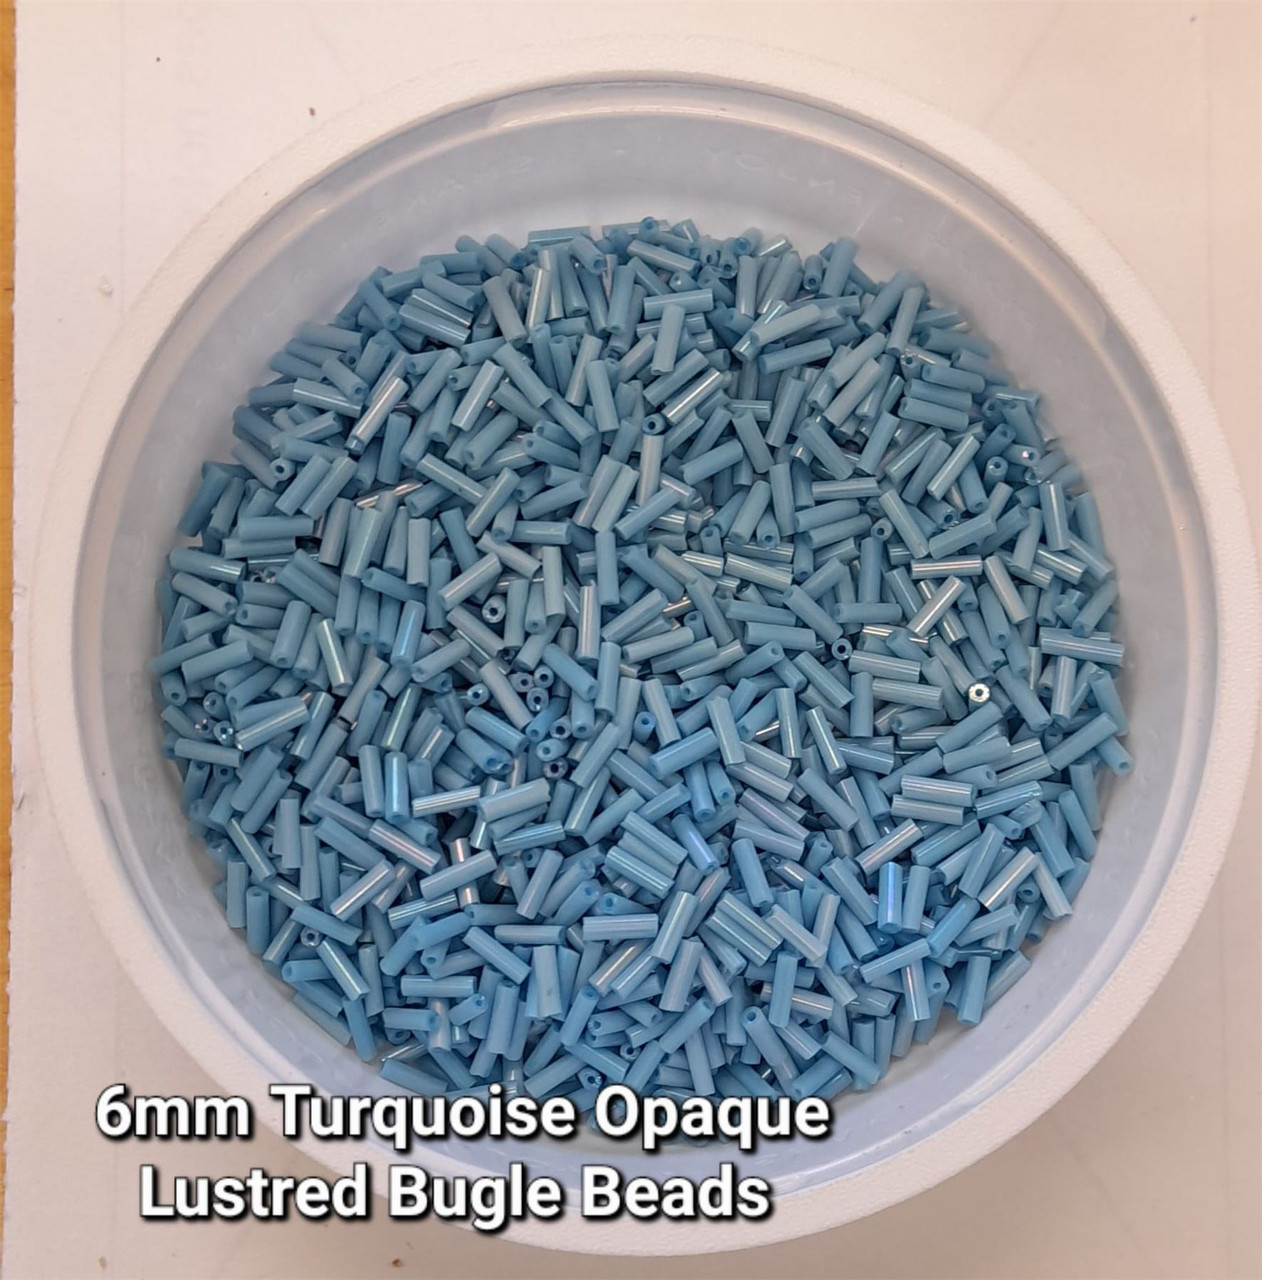 50g glass bugle beads - Turquoise Opaque Lustred - approx 6mm